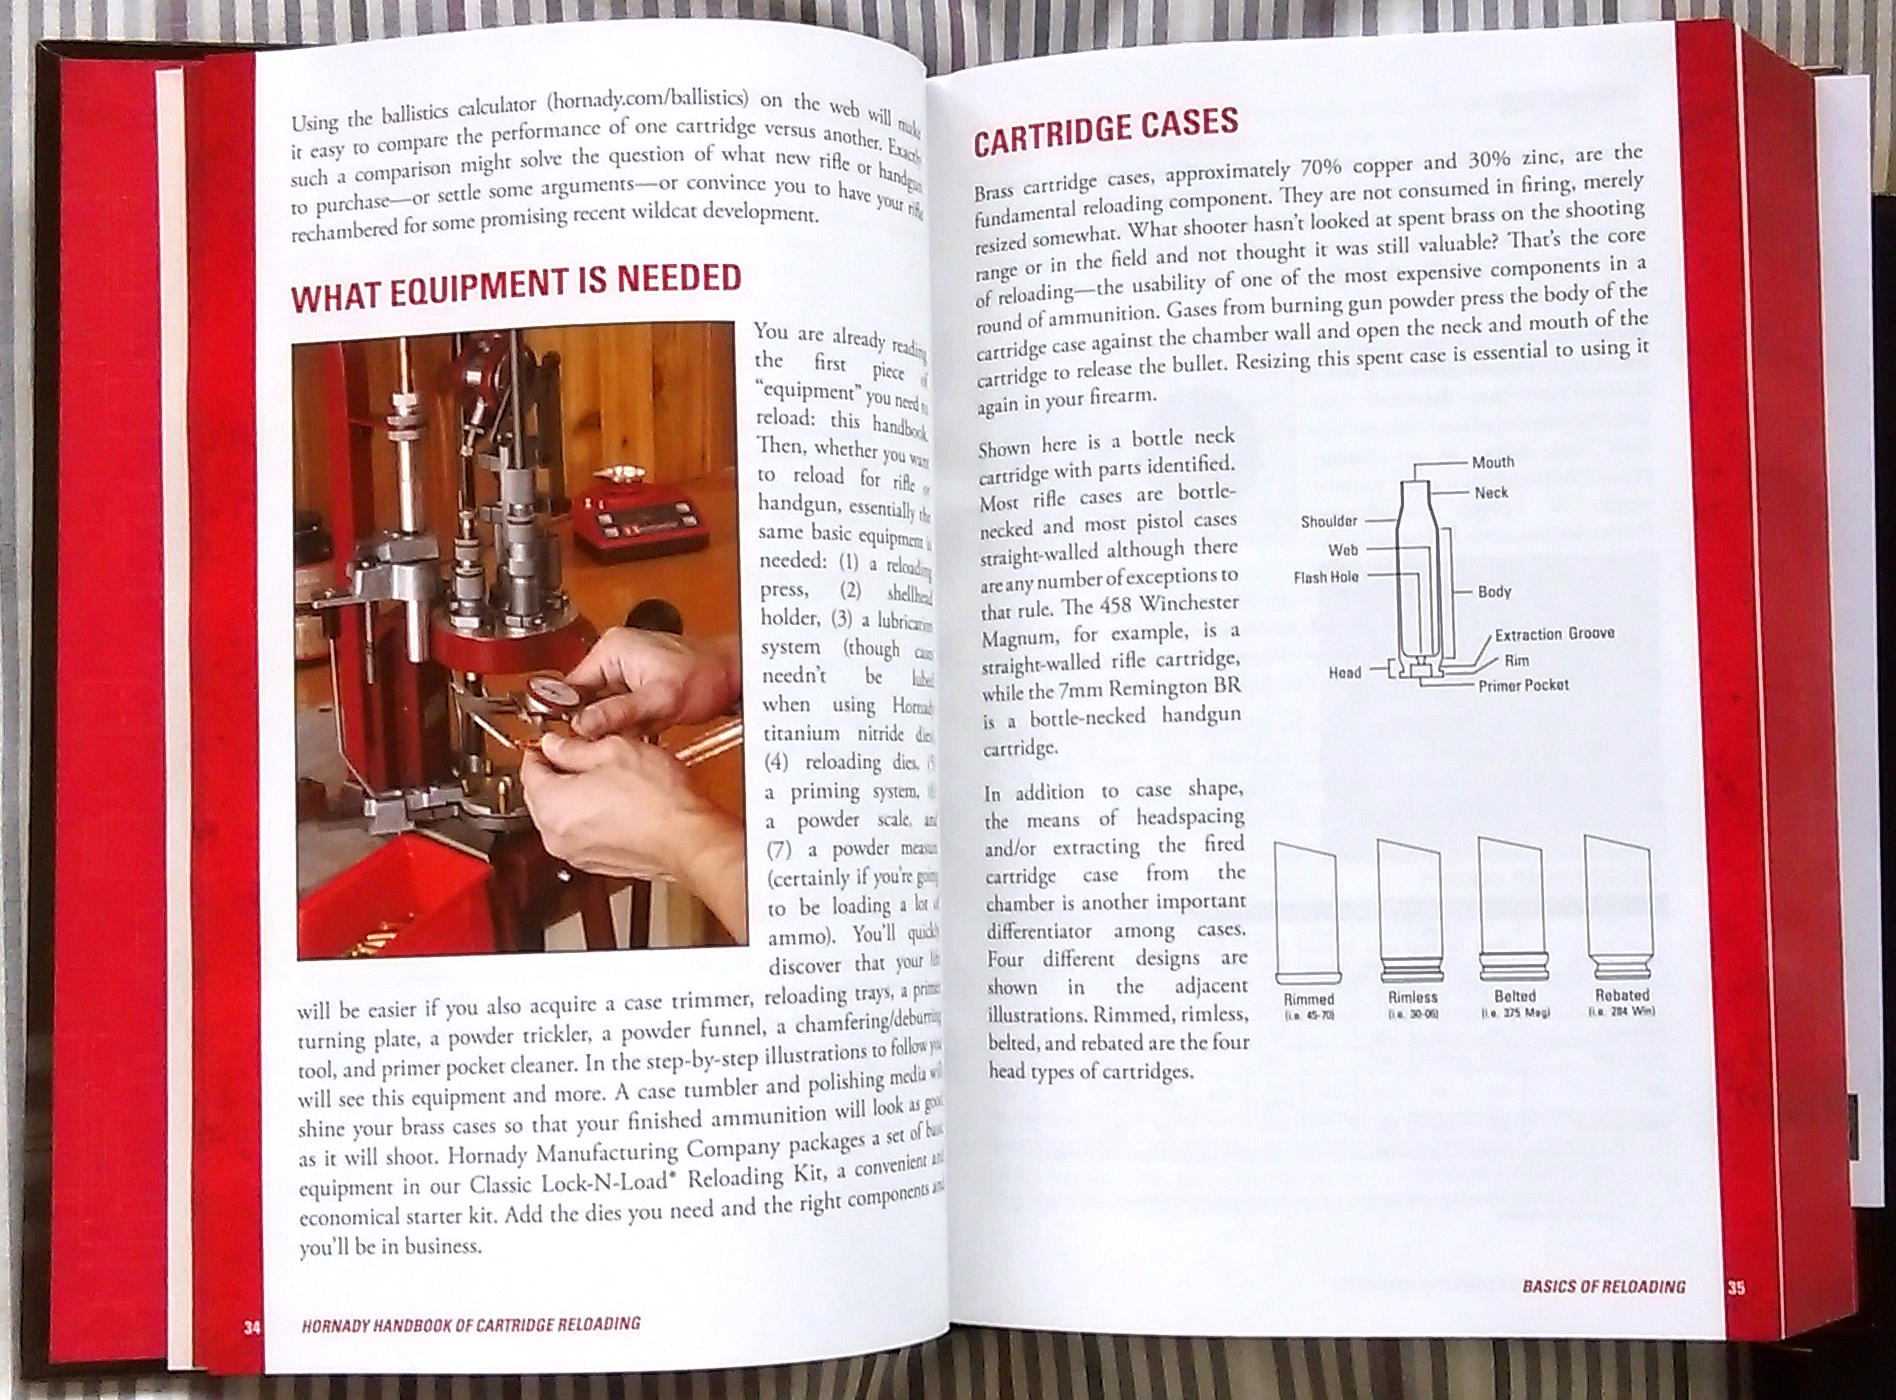 The Hornady 9th Edition handbook has excellent, clear instructions on the "how to's" of cartridge reloading.